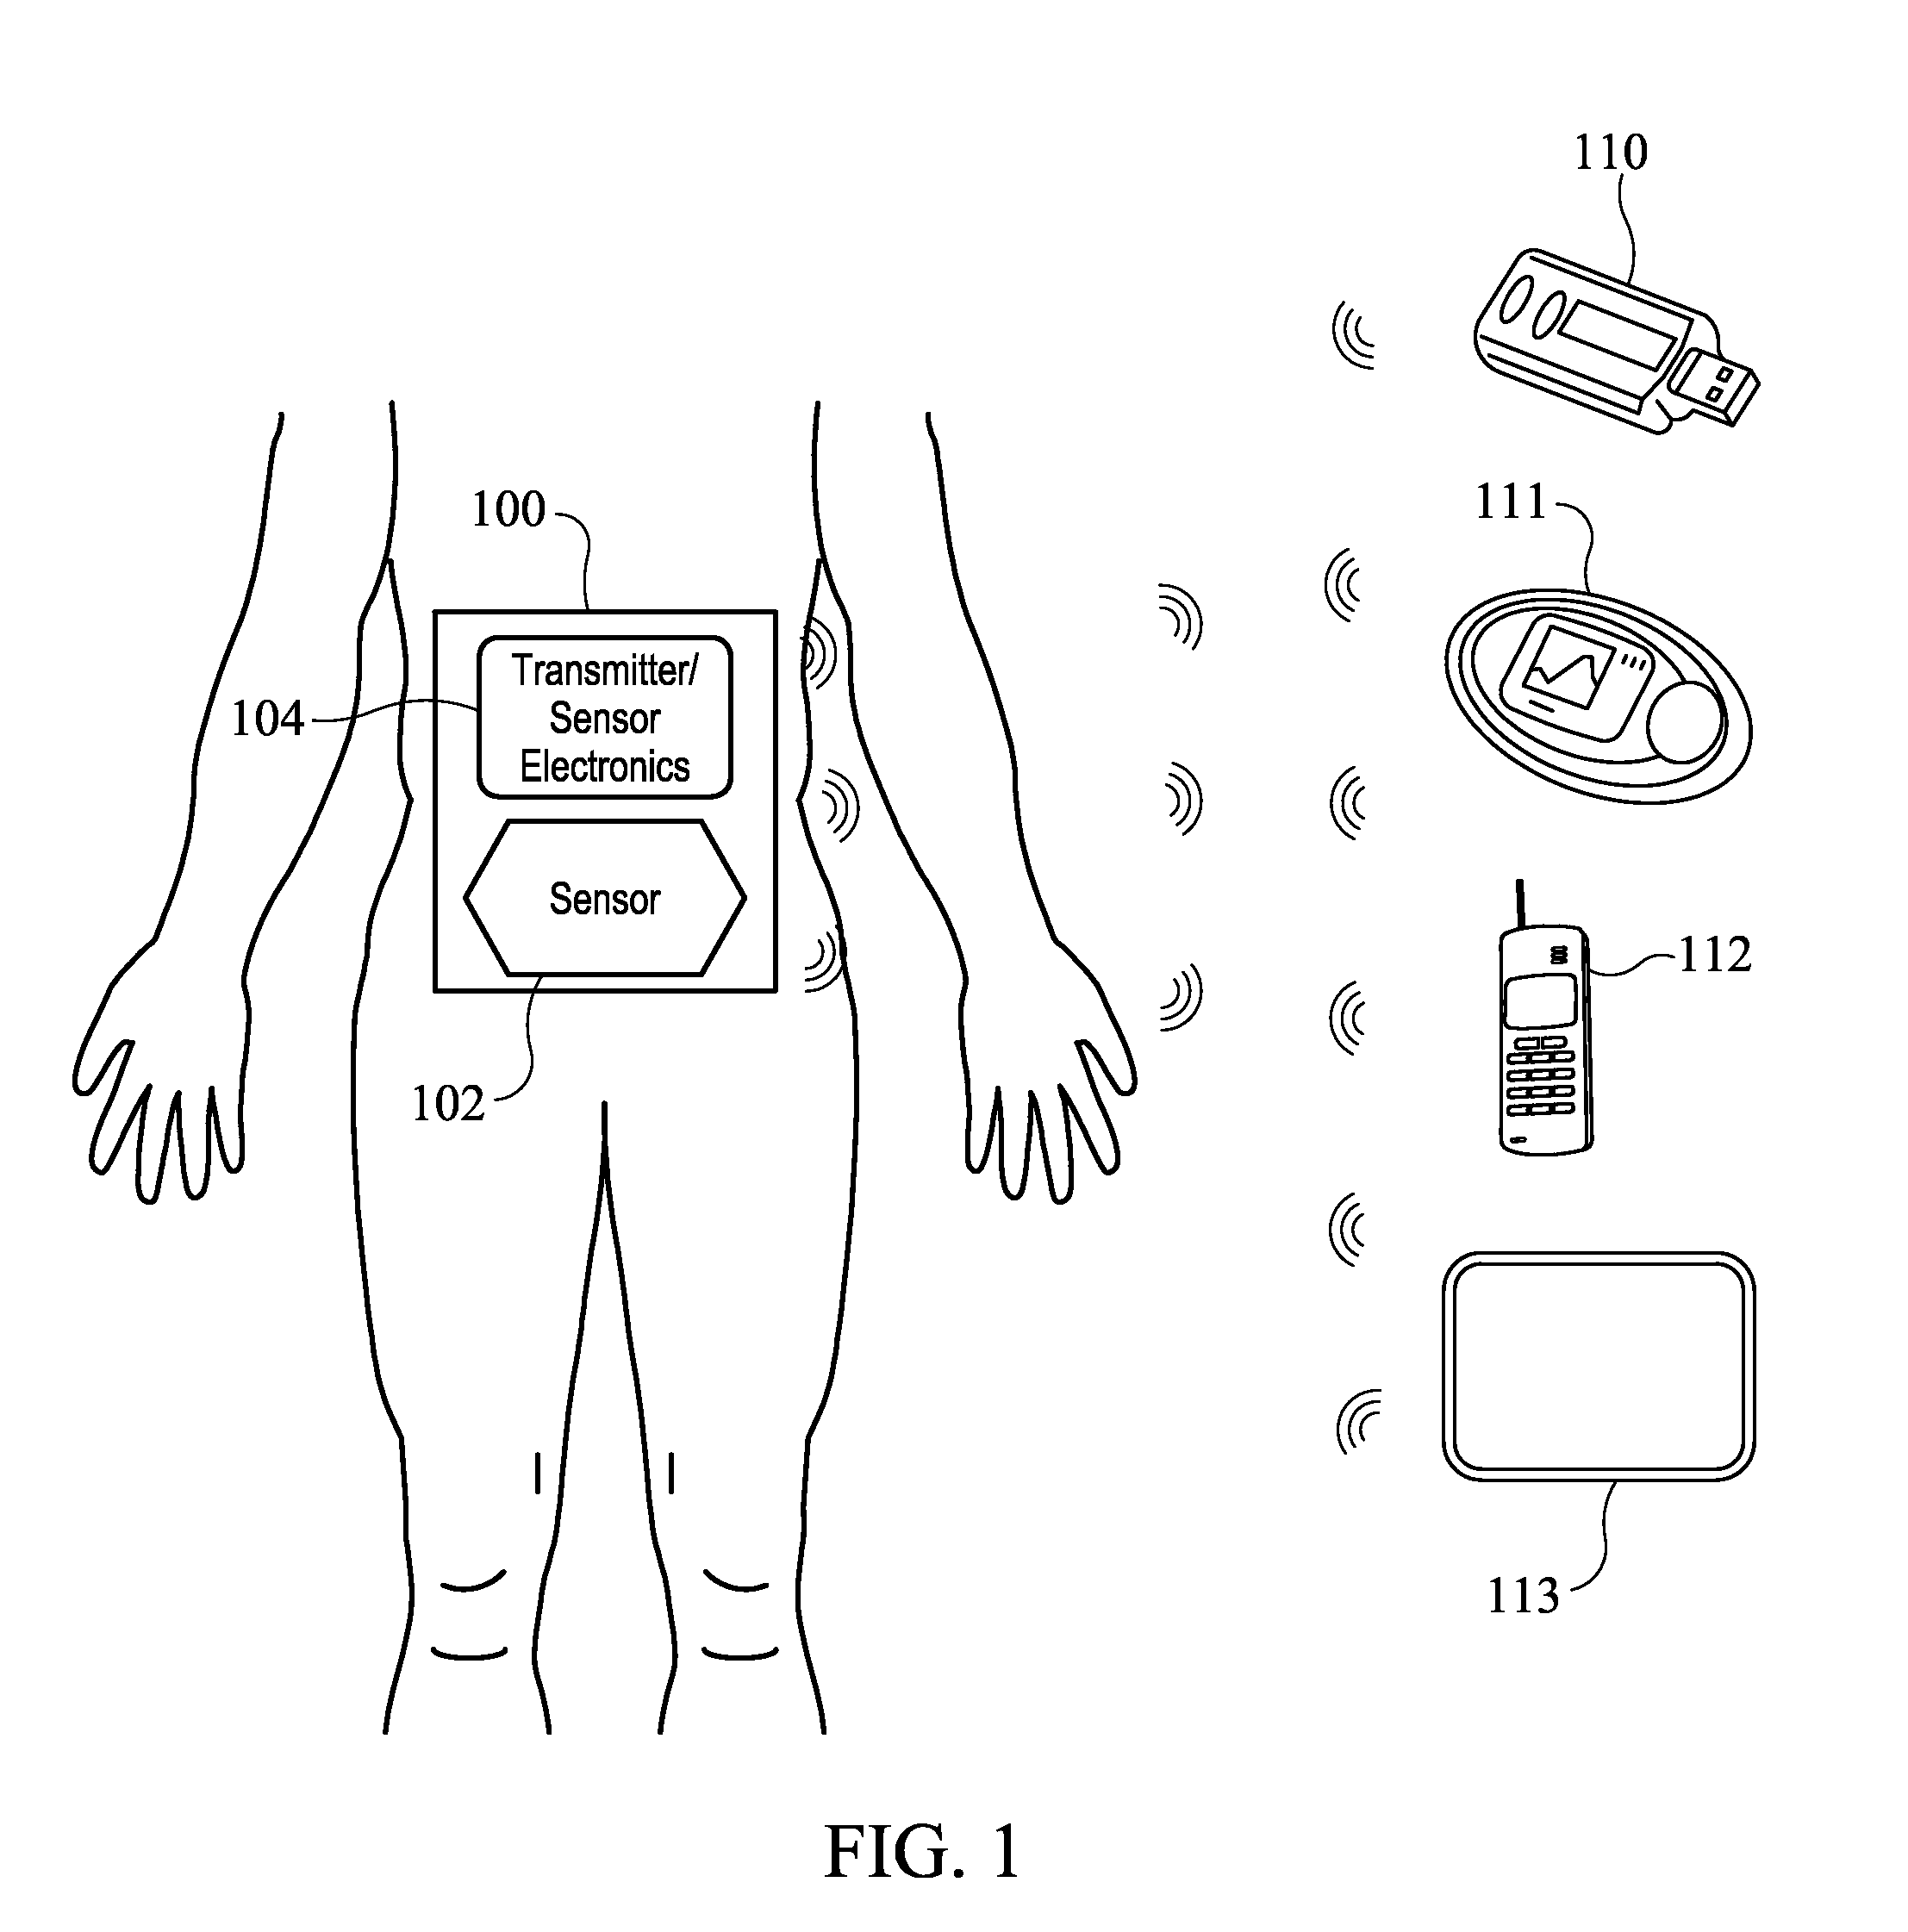 Systems and methods for leveraging smartphone features in continuous glucose monitoring